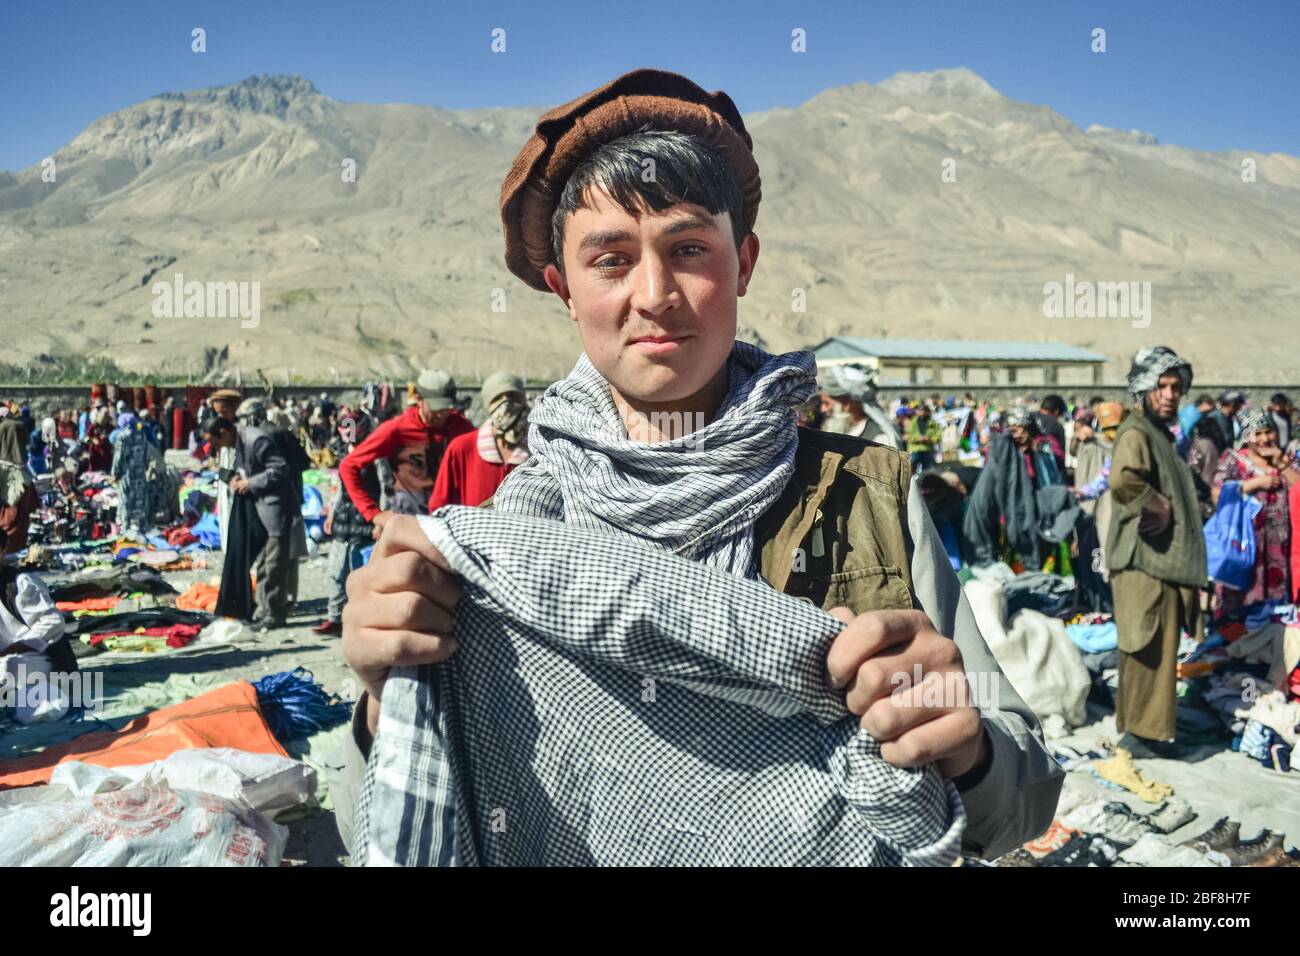 ishkashim-afghanistan-october-5-2013-handsome-afghan-pashtun-young-man-smiles-holding-head-scarf-in-afghan-market-between-tajikistan-and-afghanistan-2BF8H7F.jpg